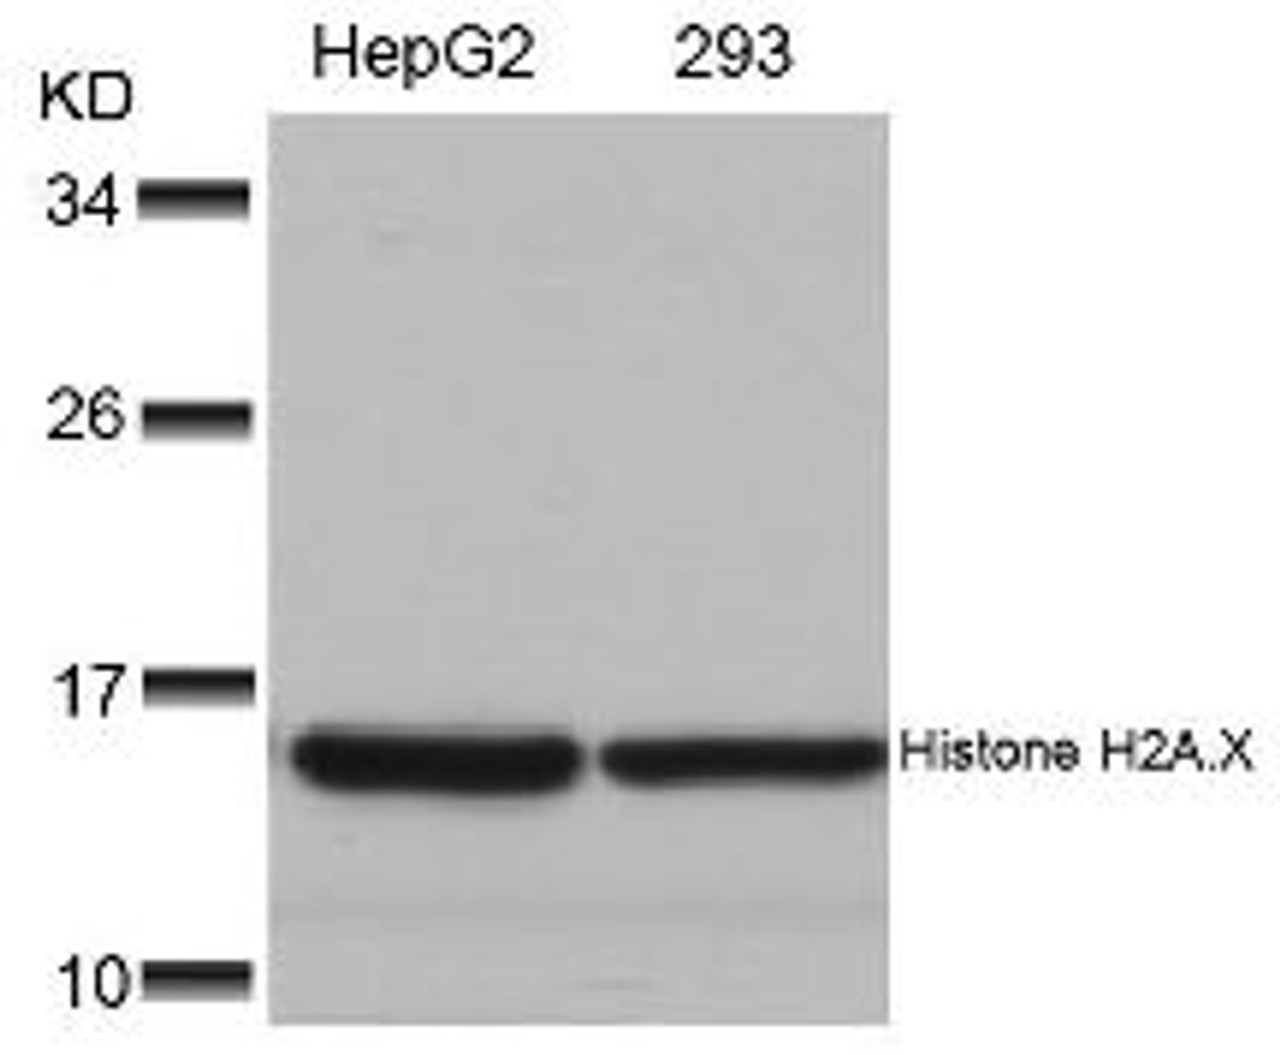 Western blot analysis of lysed extracts from HepG2 and 293 cells using Histone H2A.X (Ab-139) .